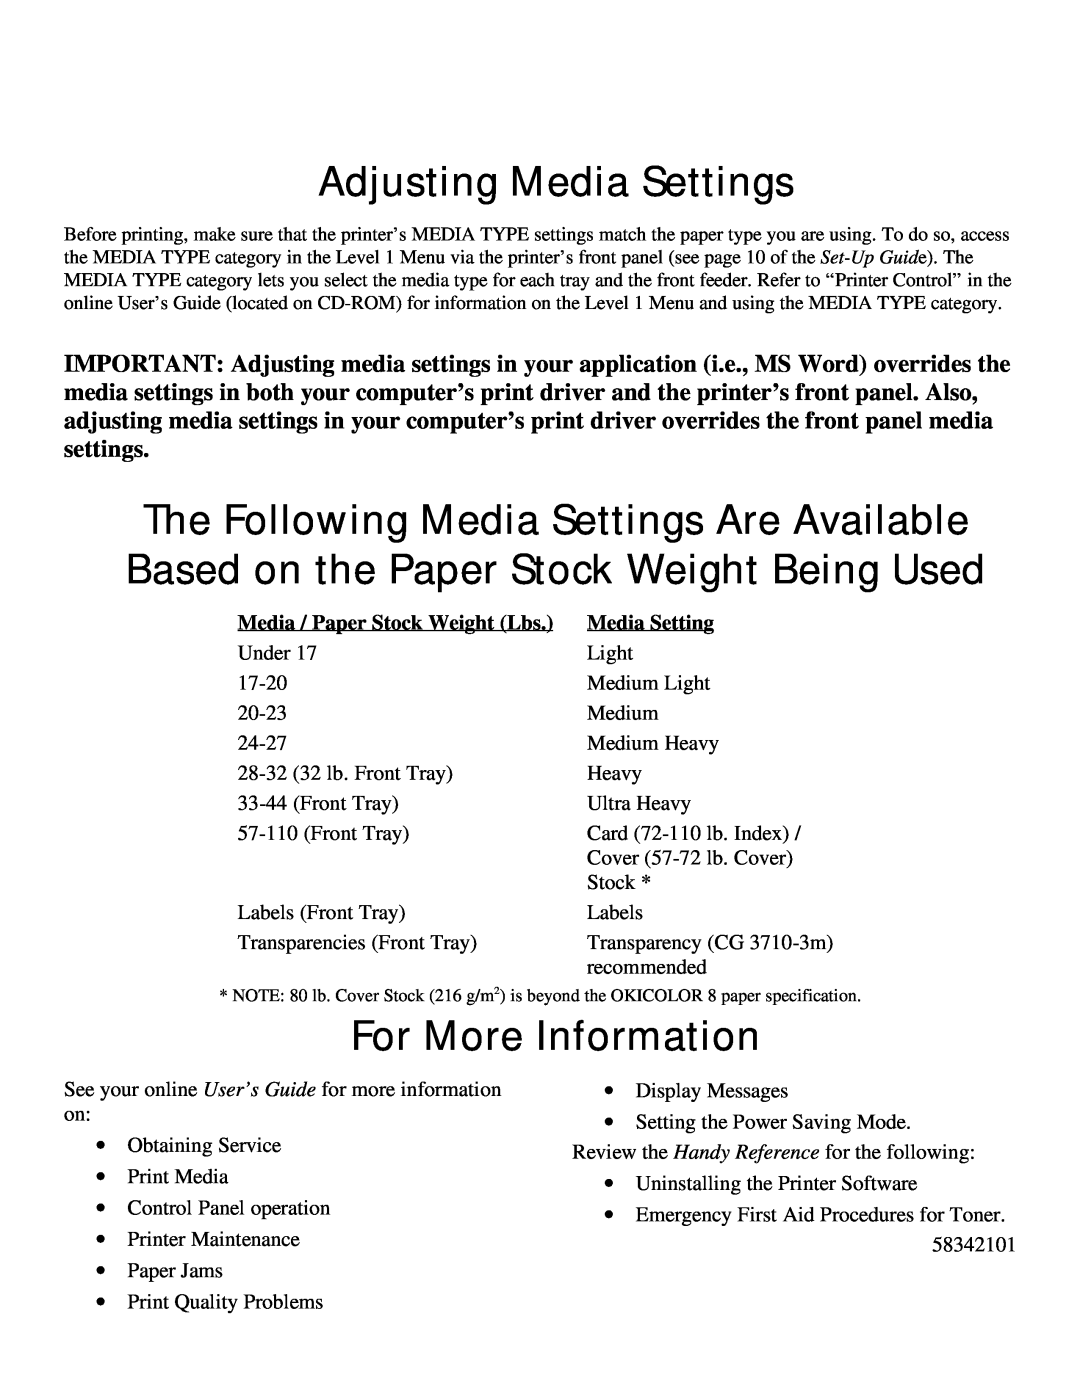 Oki 8/8N setup guide Media / Paper Stock Weight Lbs, Adjusting Media Settings, For More Information 